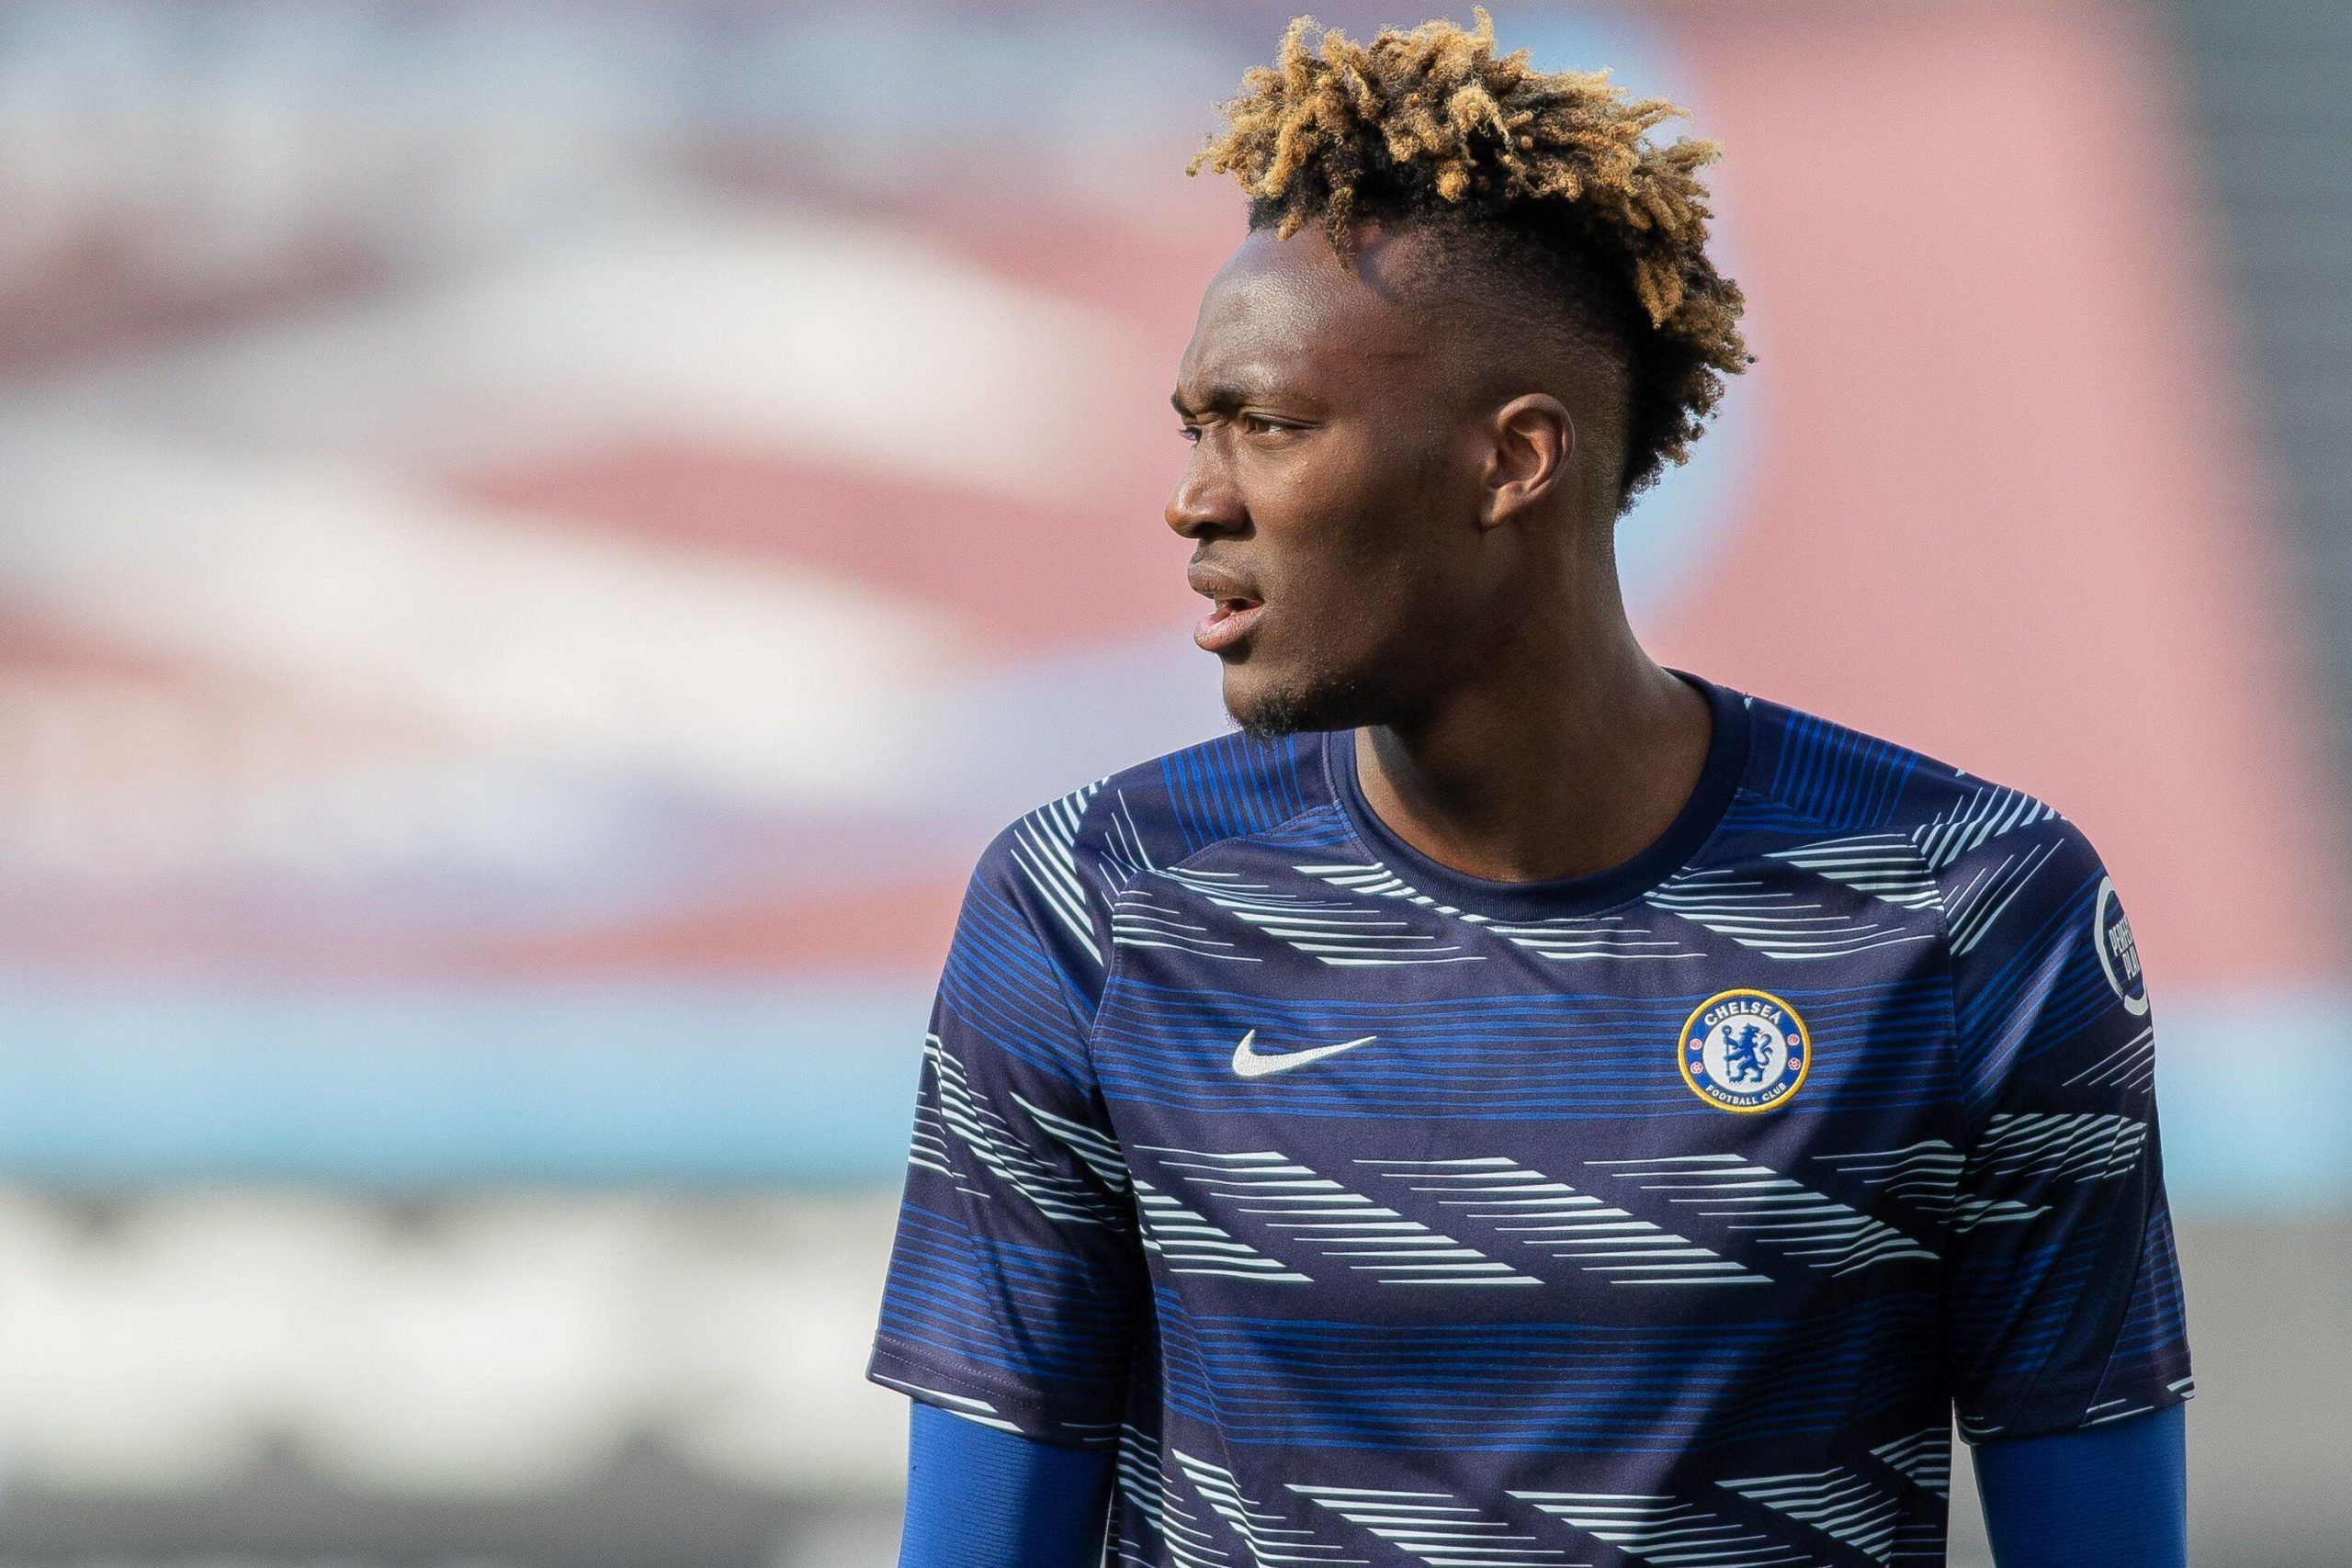 O'Hara urges Manchester City to move in for Abraham who is seen in the picture